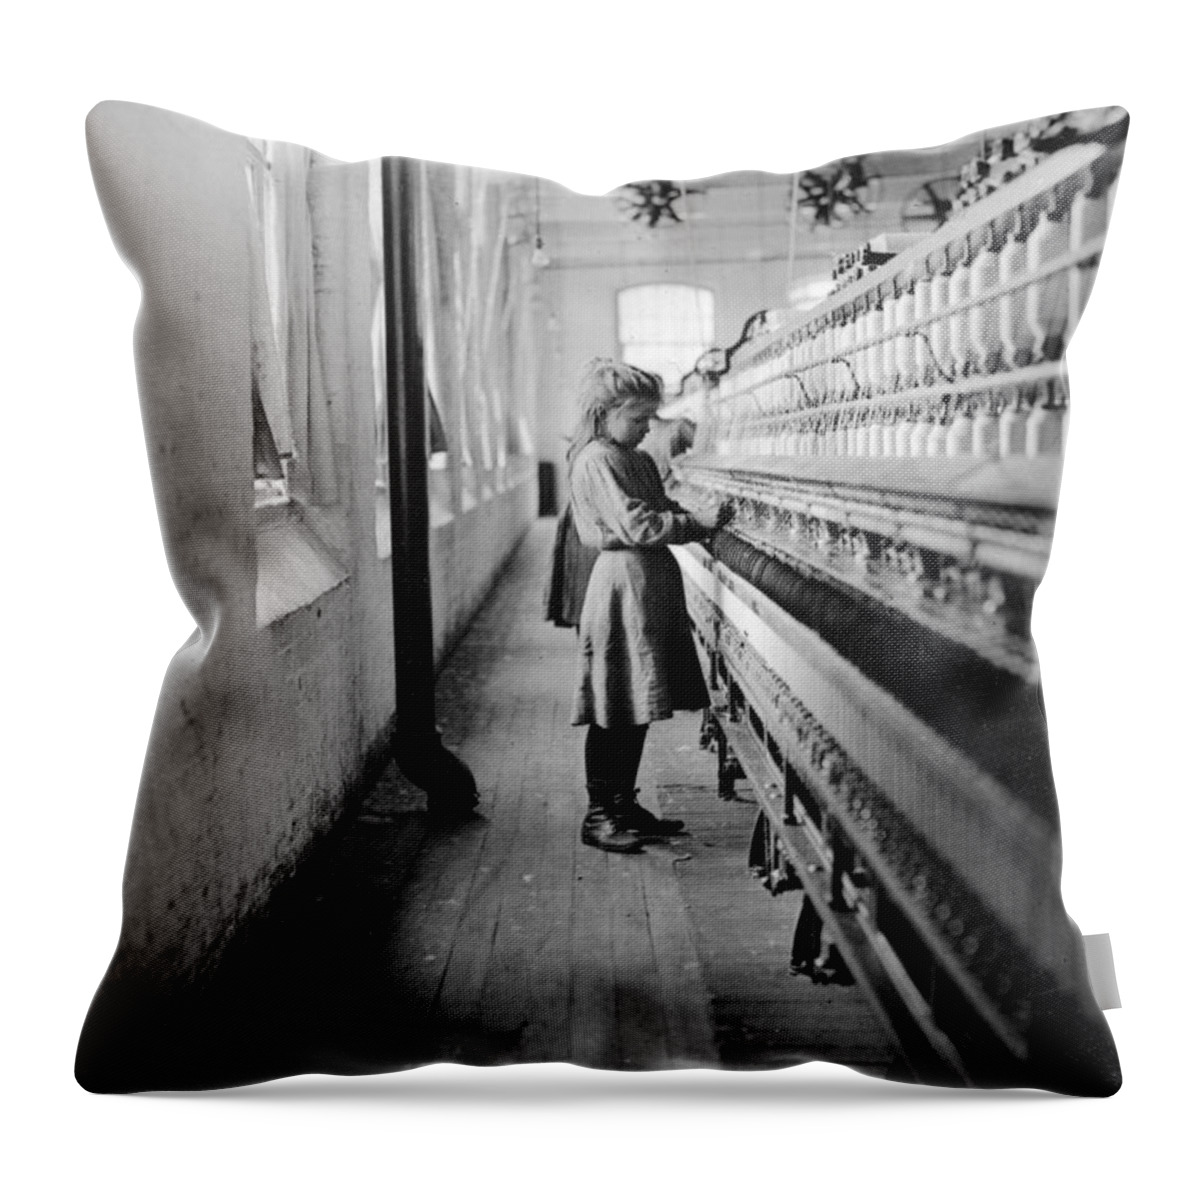 1908 Throw Pillow featuring the photograph Child Labor, 1908 by Granger